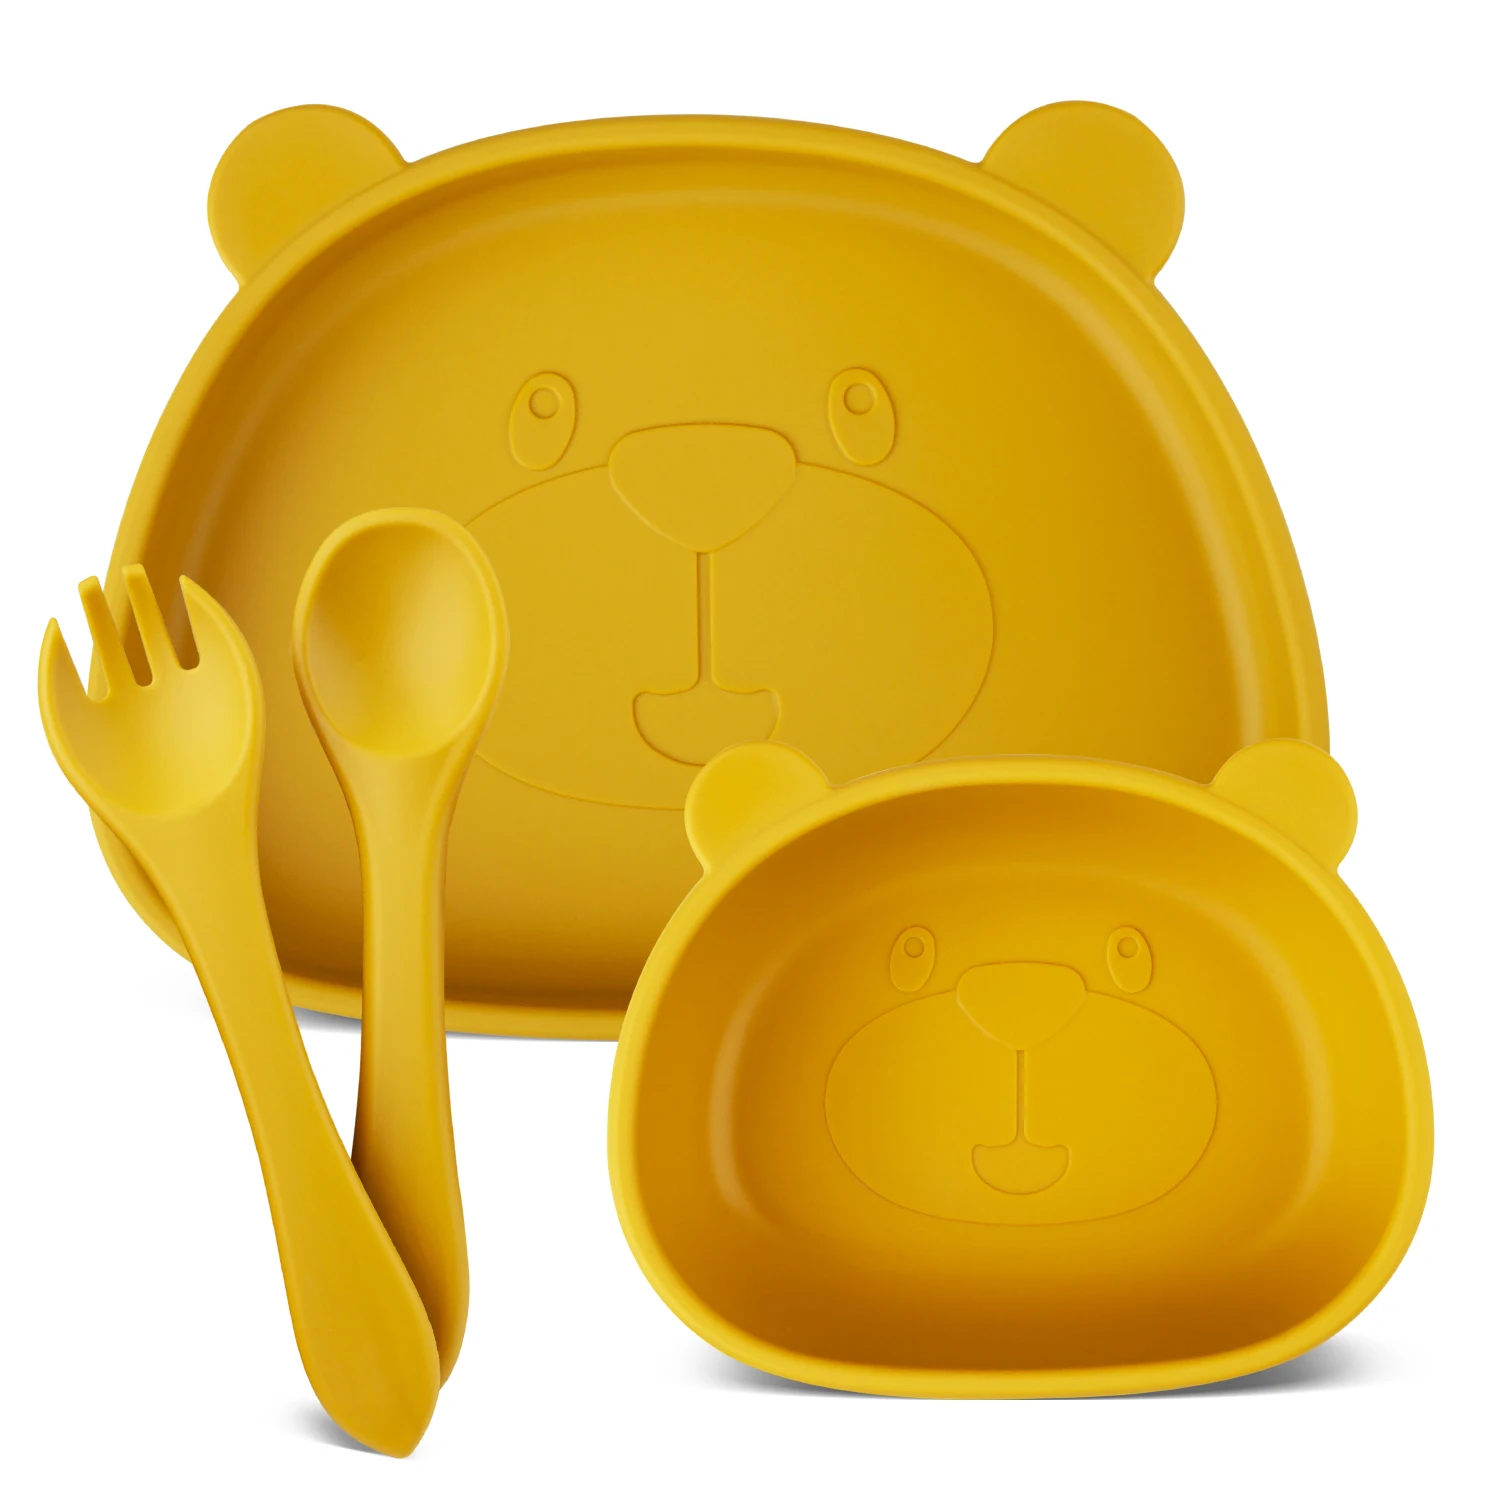 https://ae01.alicdn.com/kf/S61007b6c3e174bb4be88b6d021cb9841a/Baby-Suction-Plate-Set-with-Self-Feeding-Spoon-Fork-Bowl-Toddler-Divided-Plates-and-Utensils-for.jpg